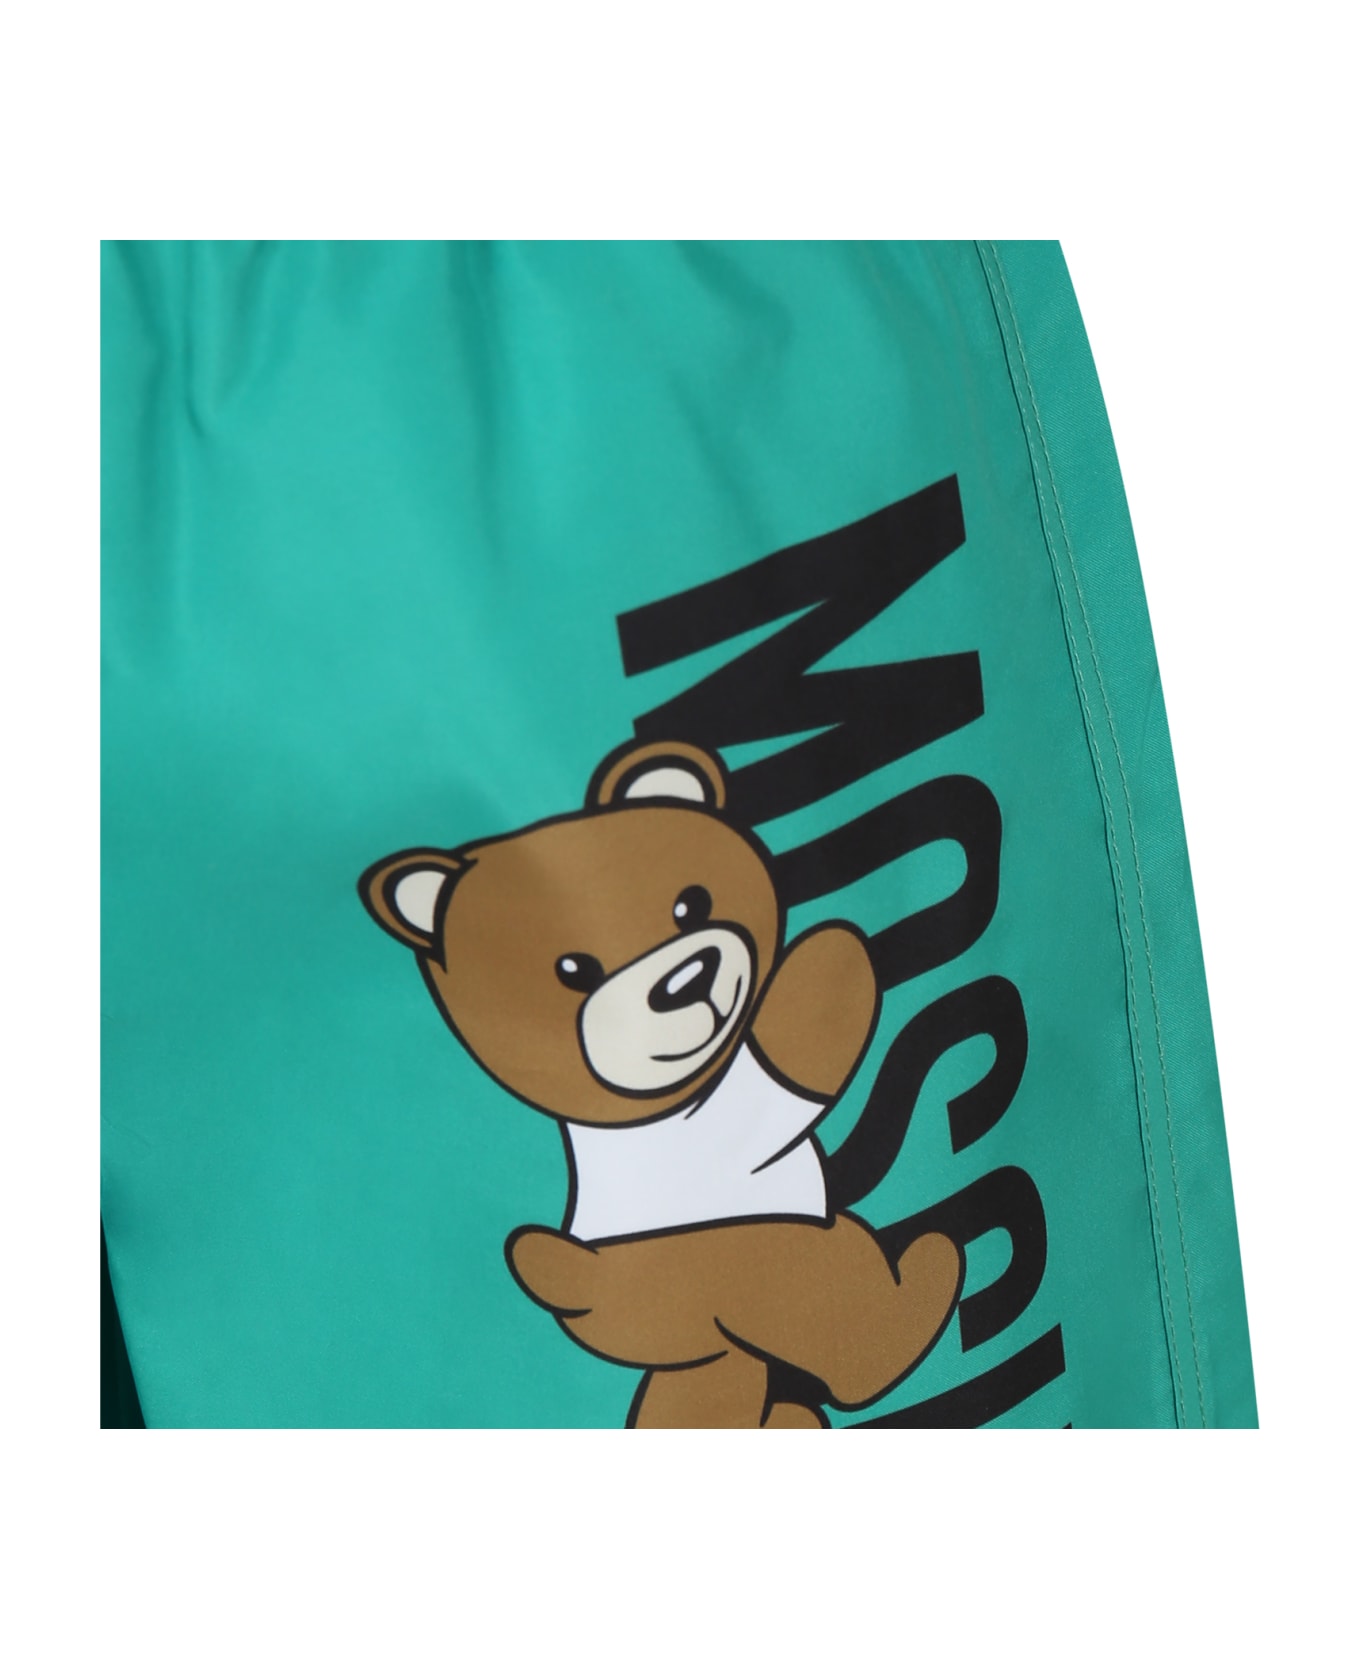 Moschino Green Swim Shorts For Boy With Teddy Bear And Logo - Green